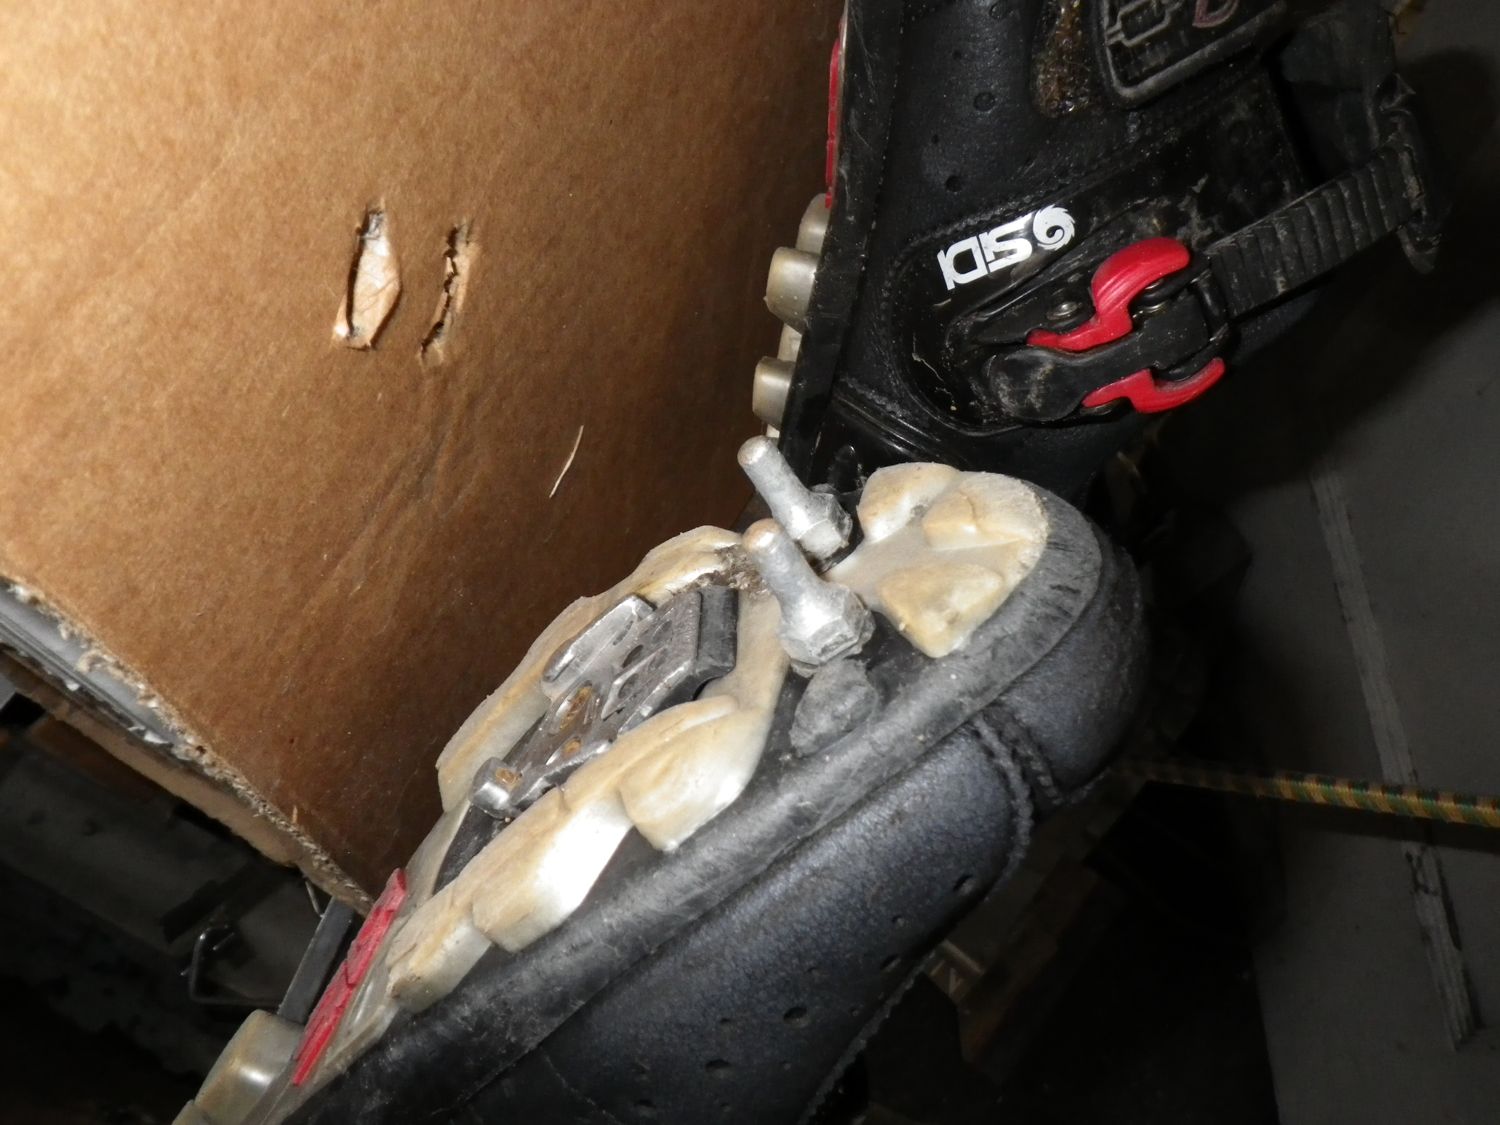 How to hang cyclocross shoes 1